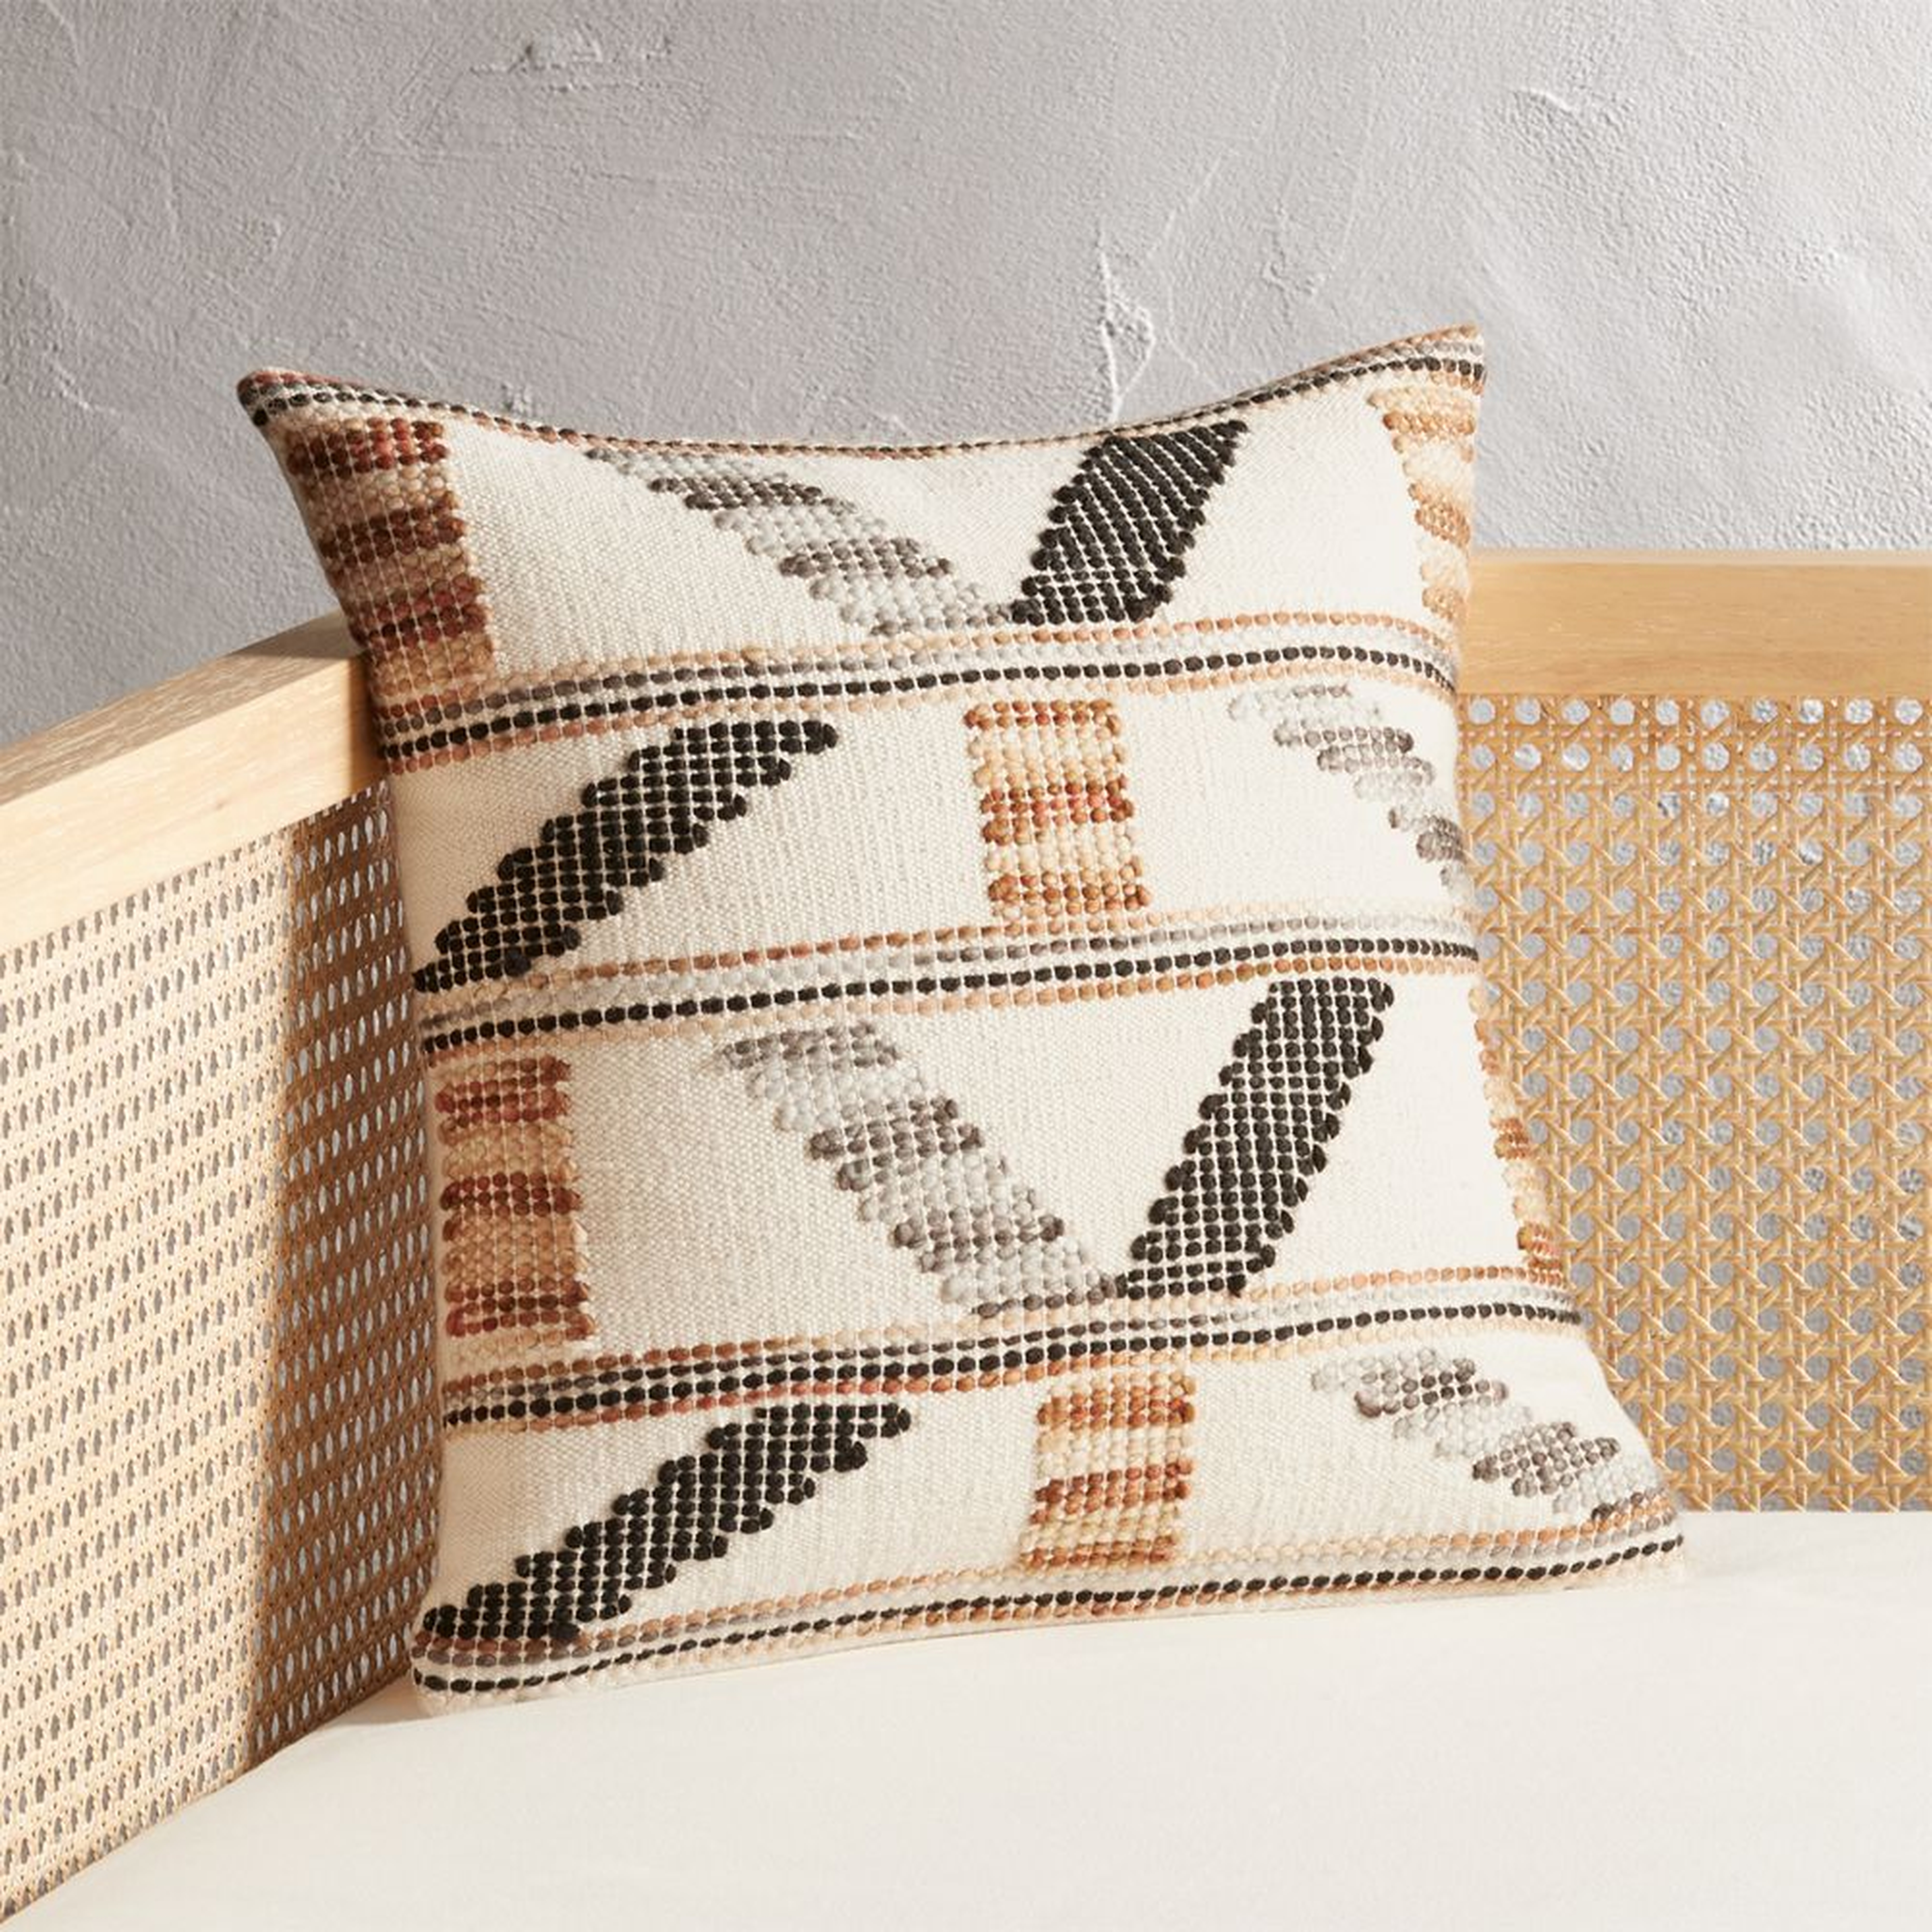 16" Dorado Handwoven Pillow with Feather-Down Insert - CB2